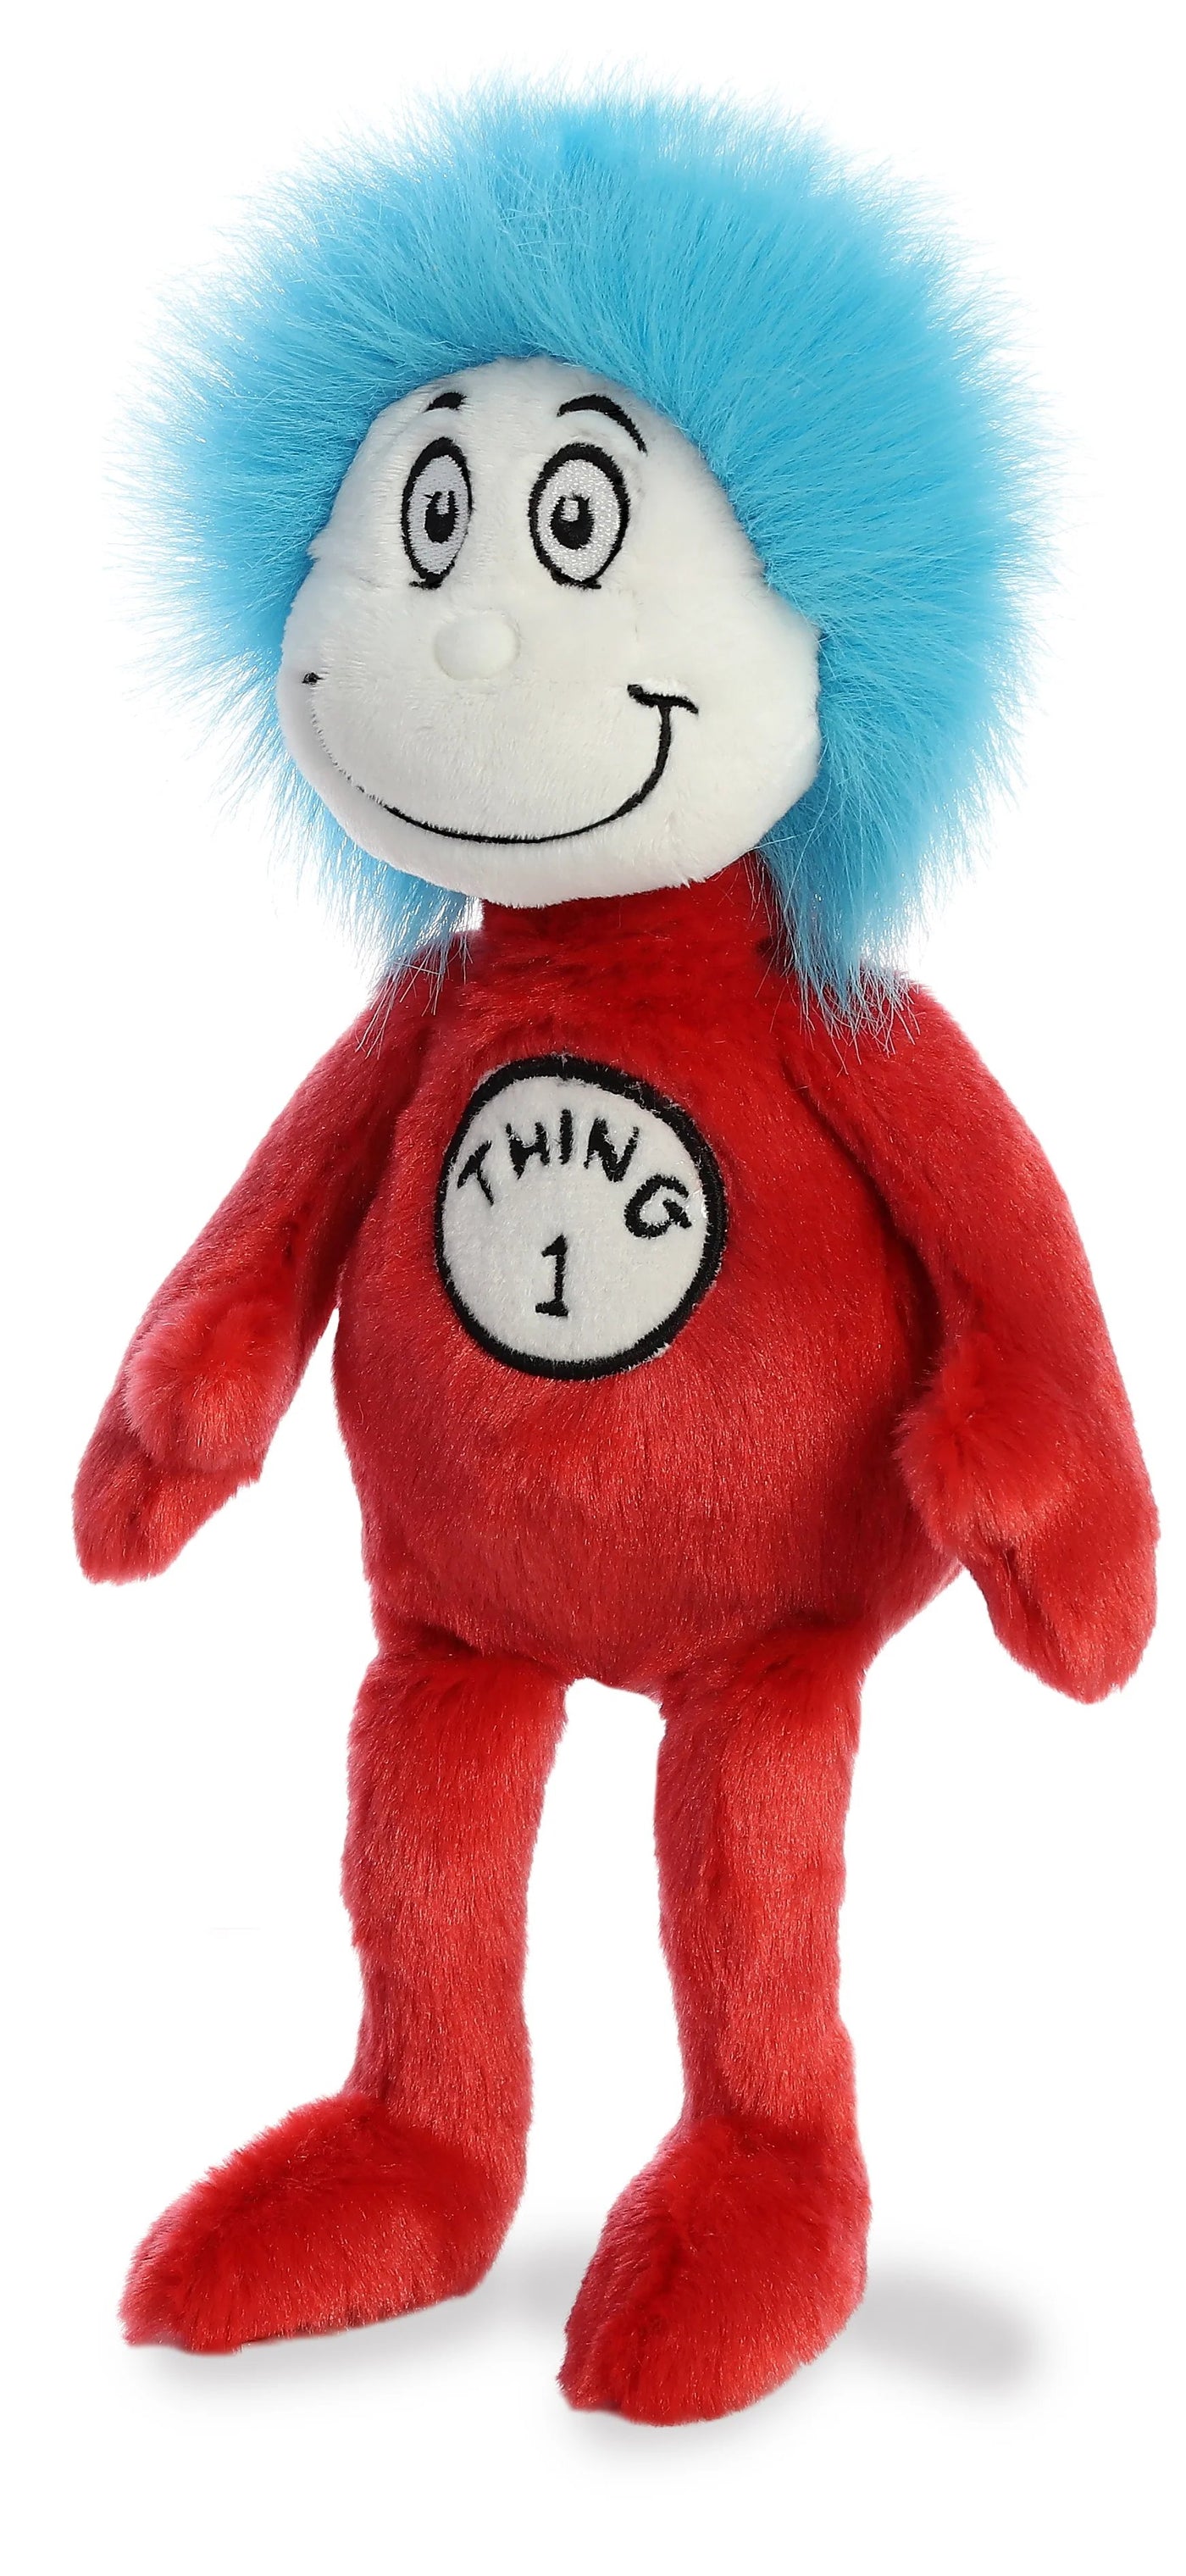 Aurora Dr. Seuss The Cat in the Hat 12" Thing 1 Plush Toy - Alternate Side View